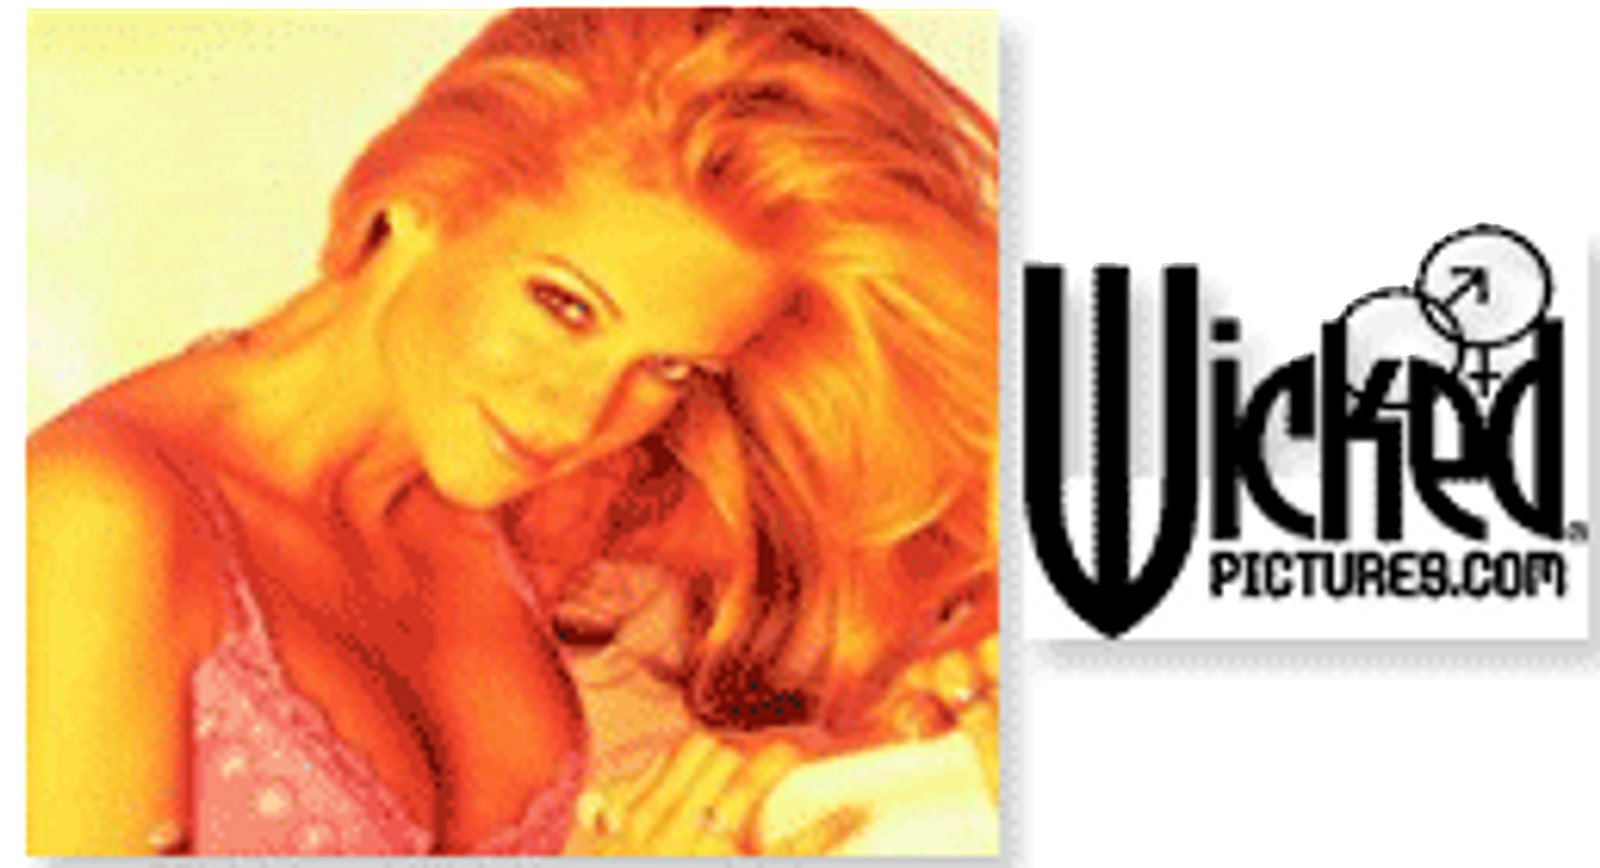 Jessica Drake To Star in Second Wicked Pictures Feature